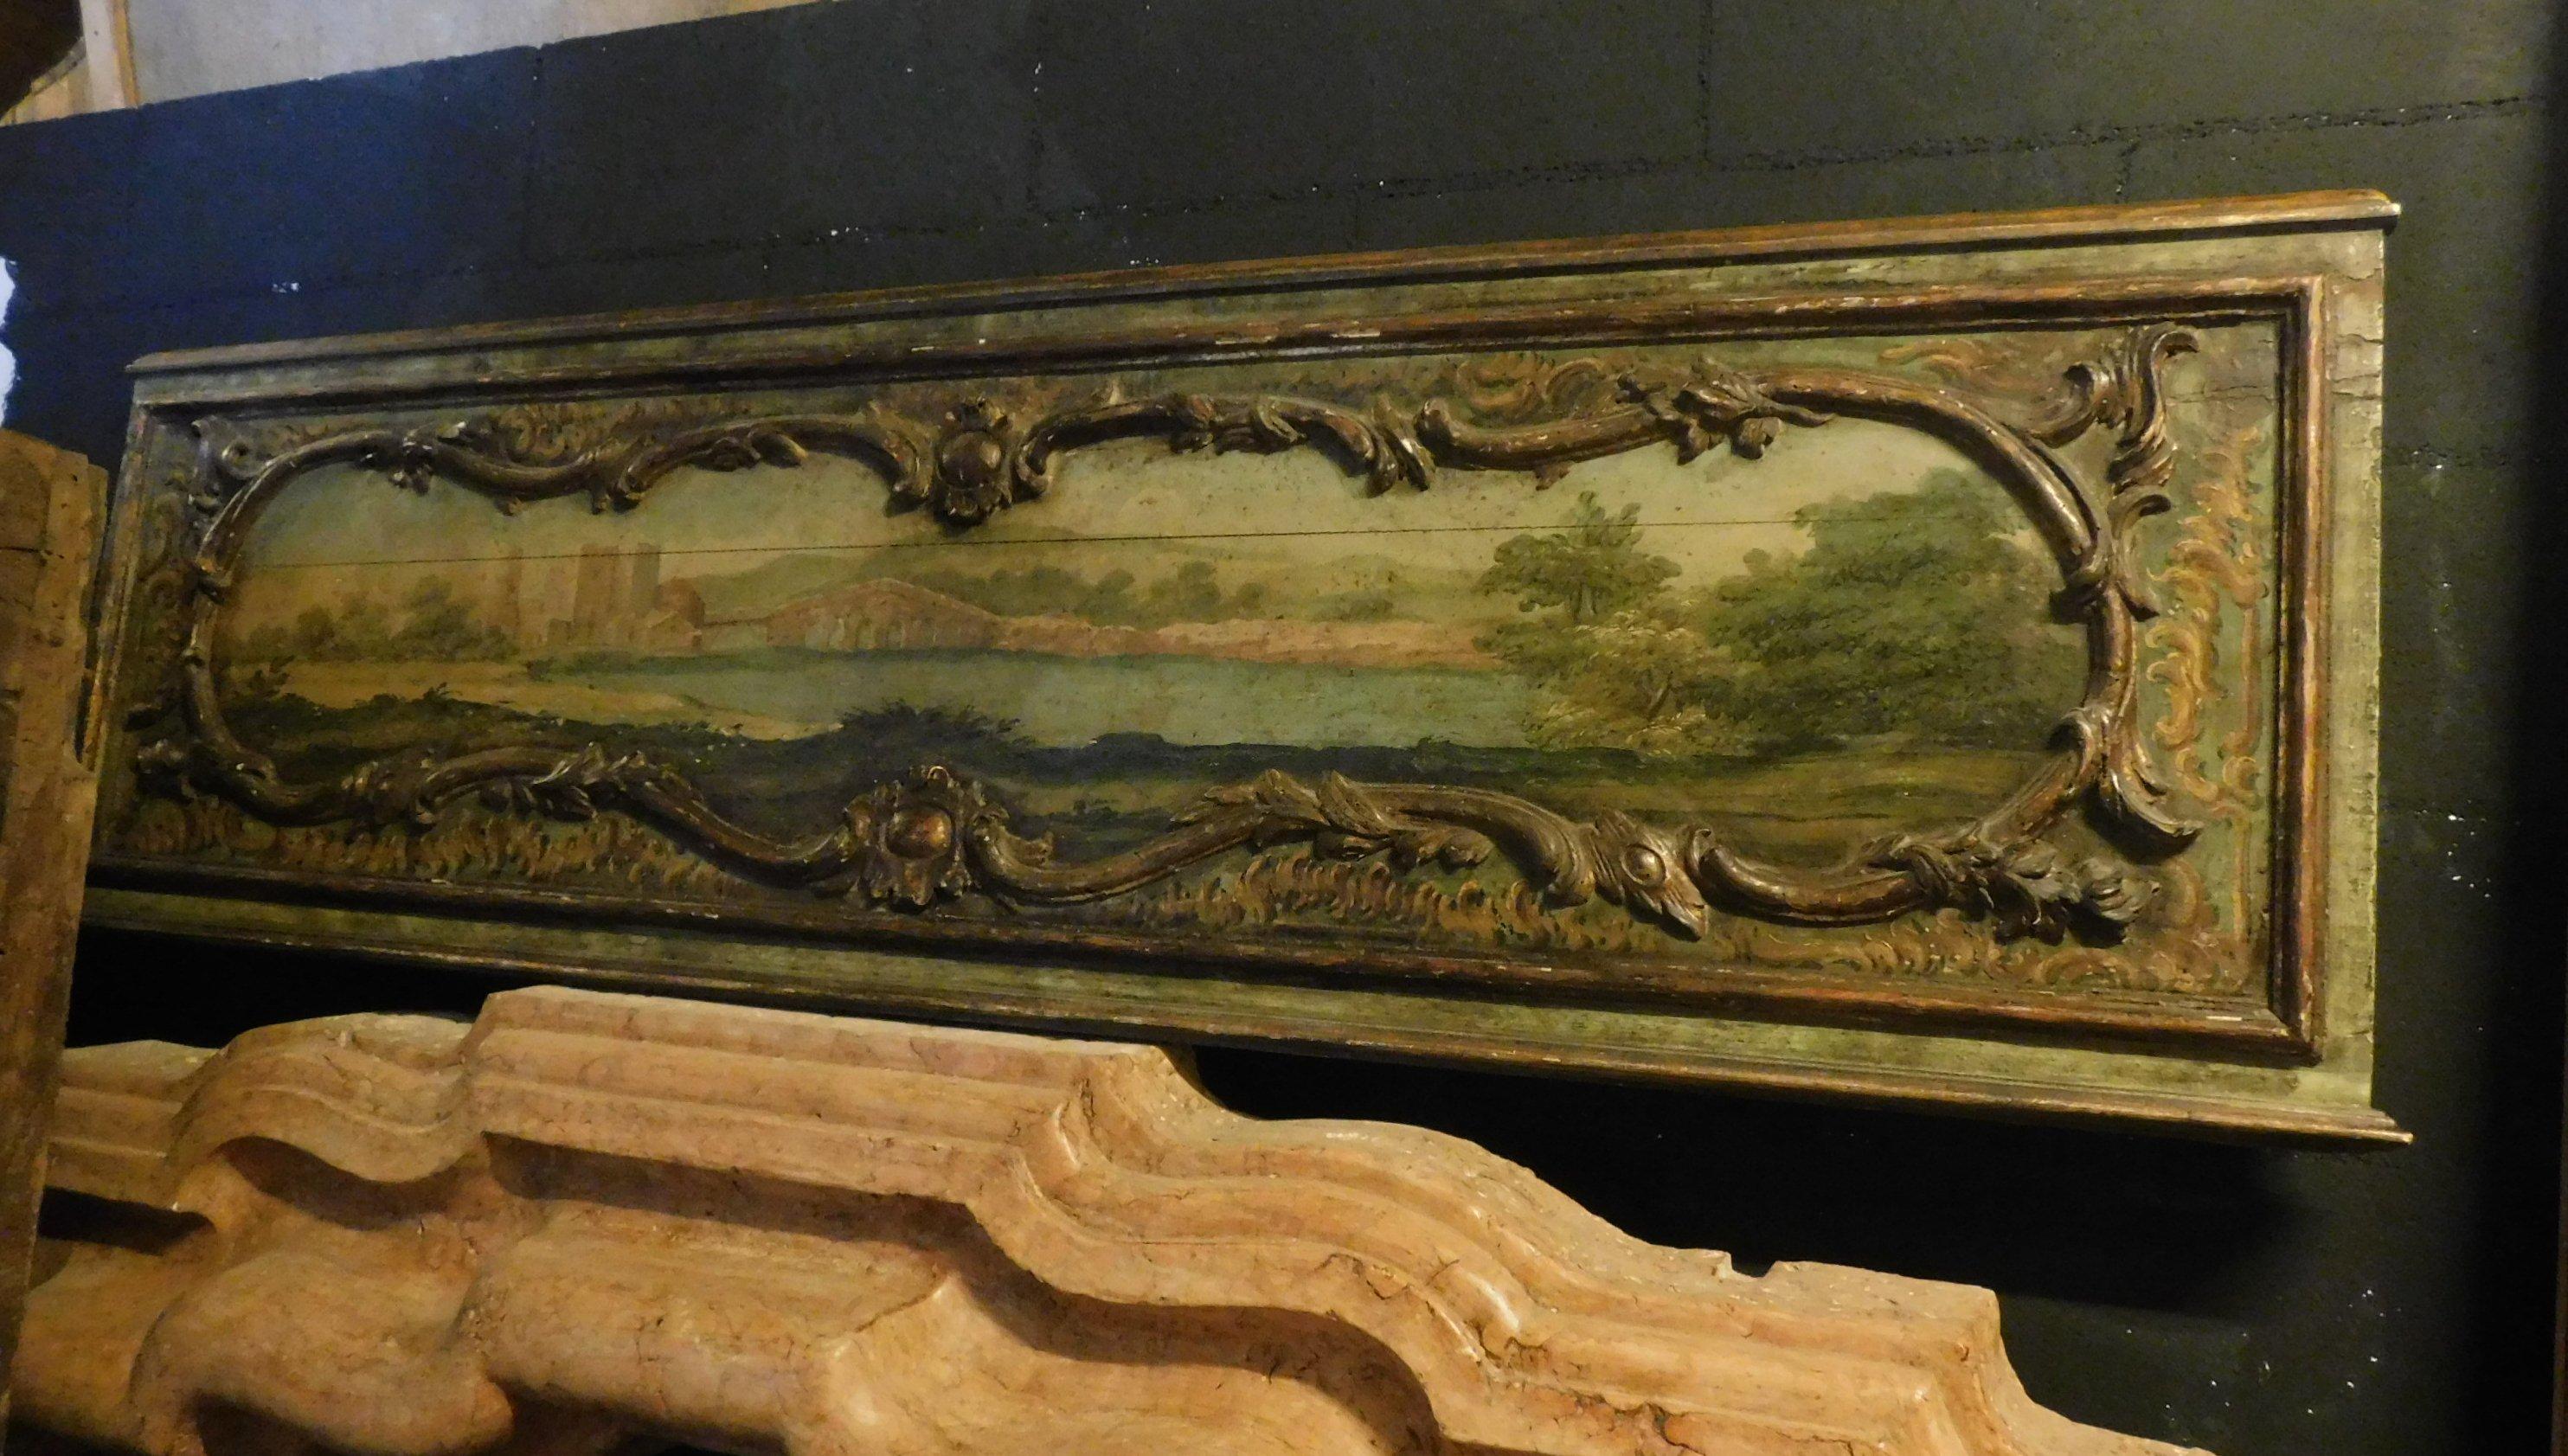 Antique panel hand painted on wood, green background with Italian landscape painting also suitable as a headboard or as a decorative painting, Italy, 1700.